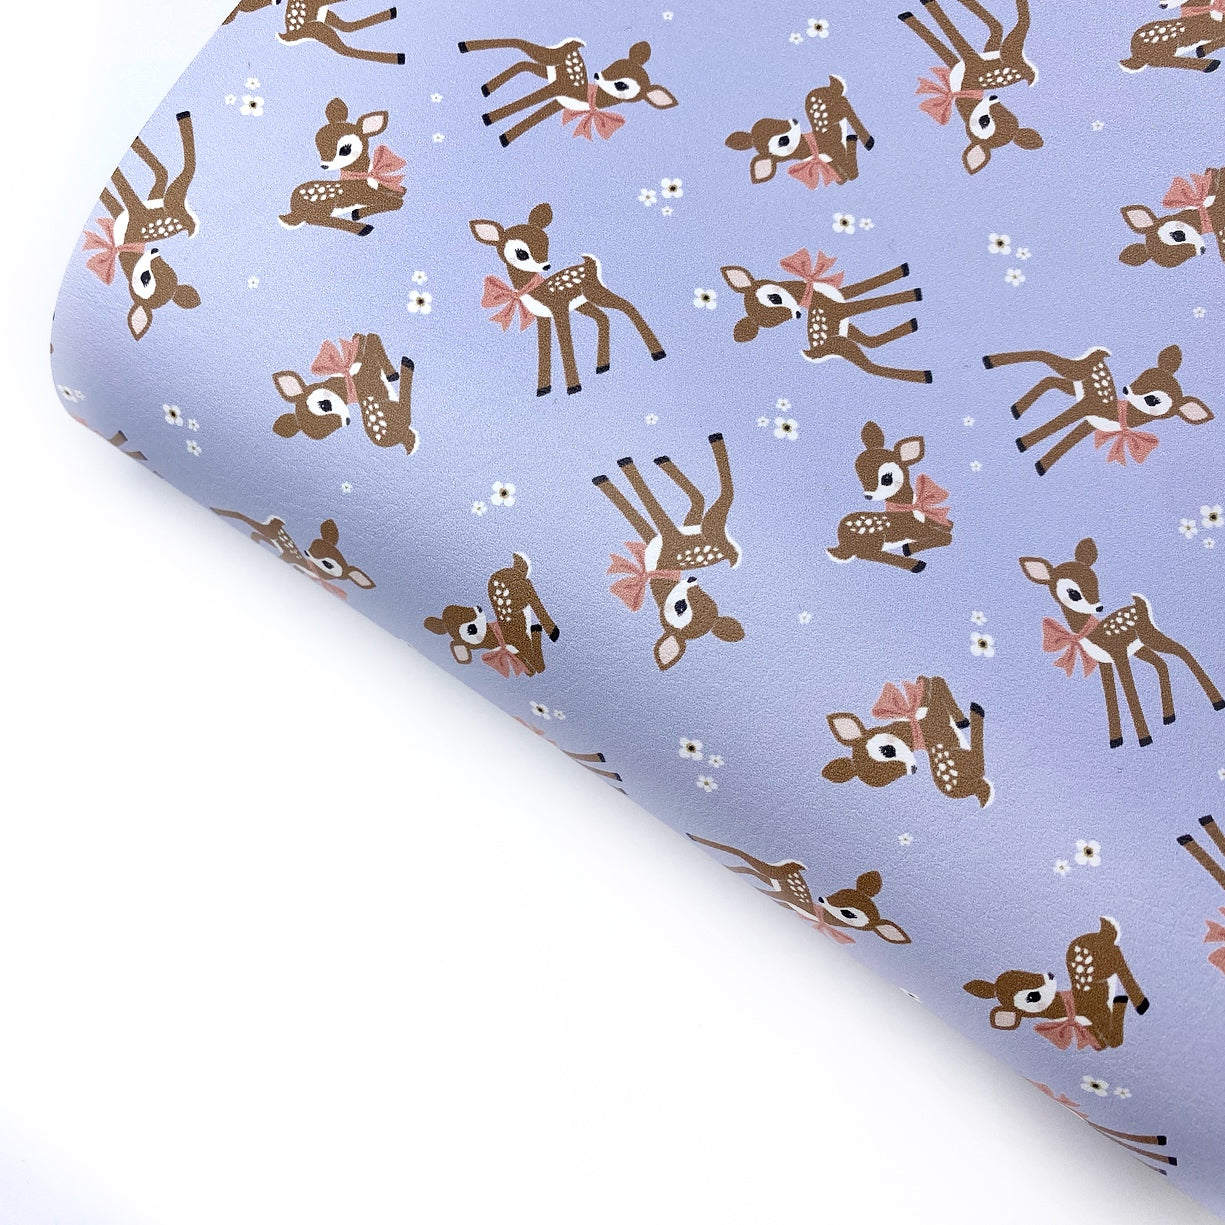 Little Darling Deer Premium Faux Leather Fabric Sheets